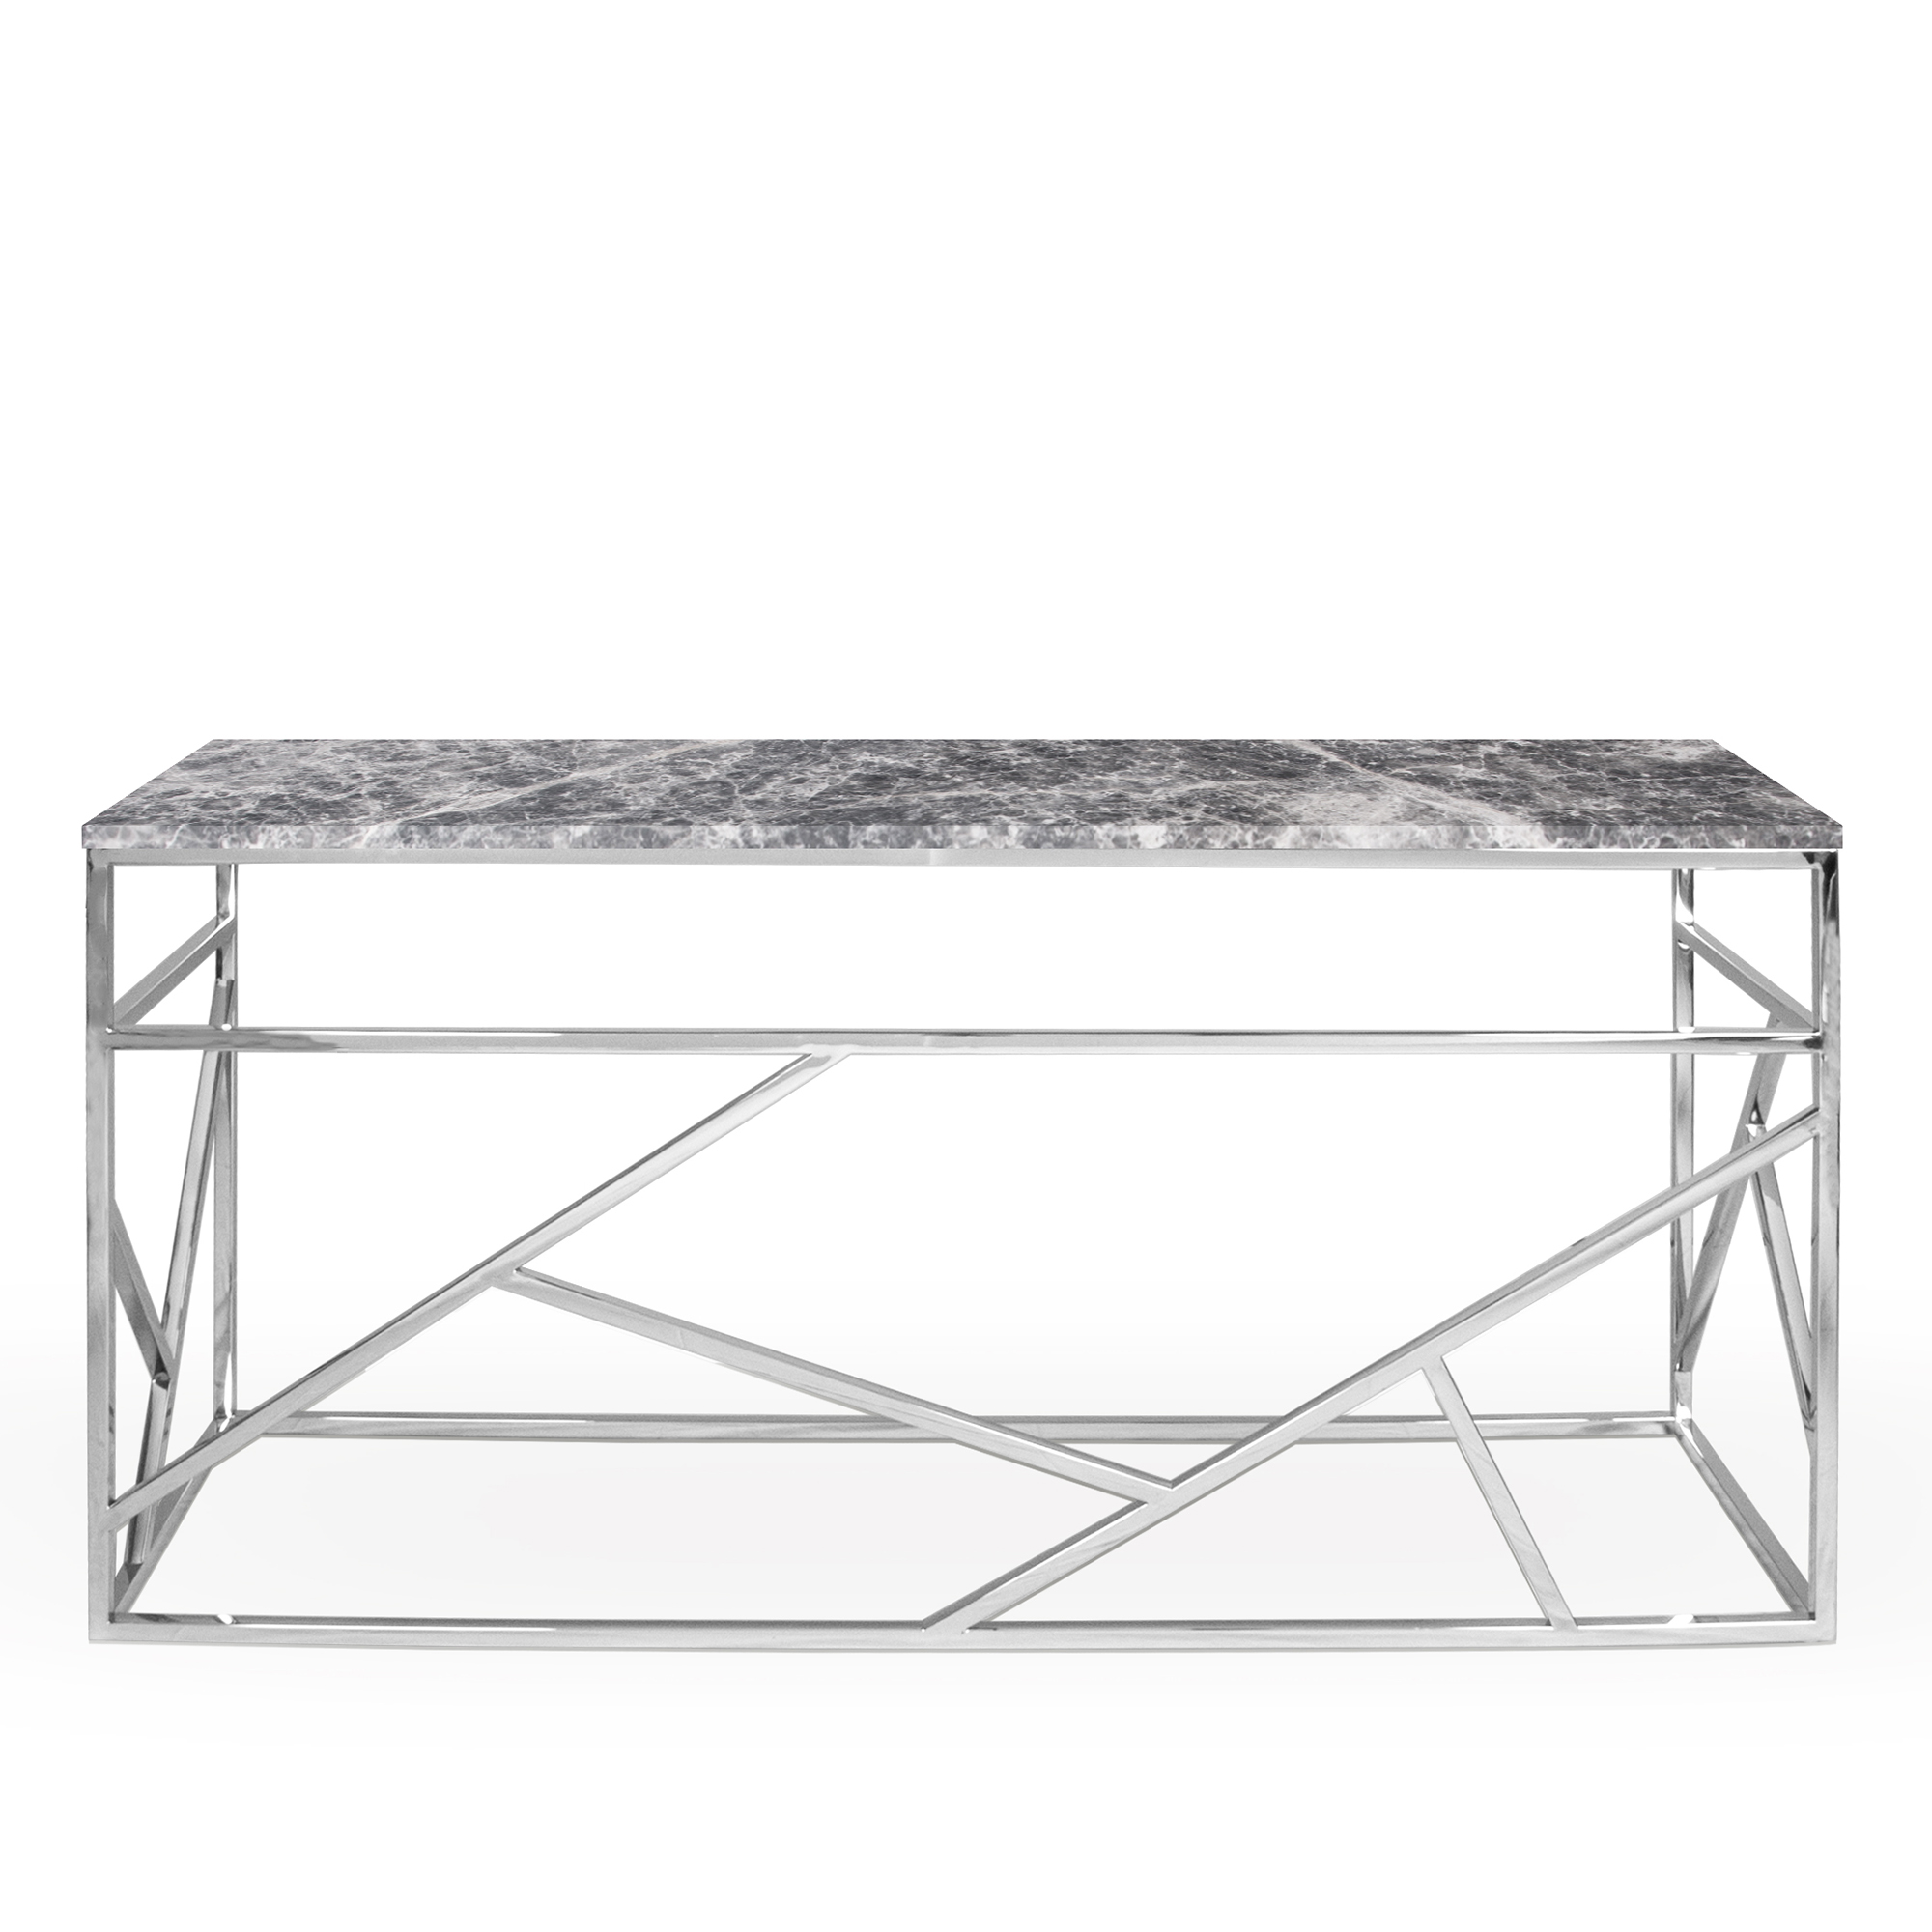 Miro W | Art Series | Decasa Marble Marble Dining Table